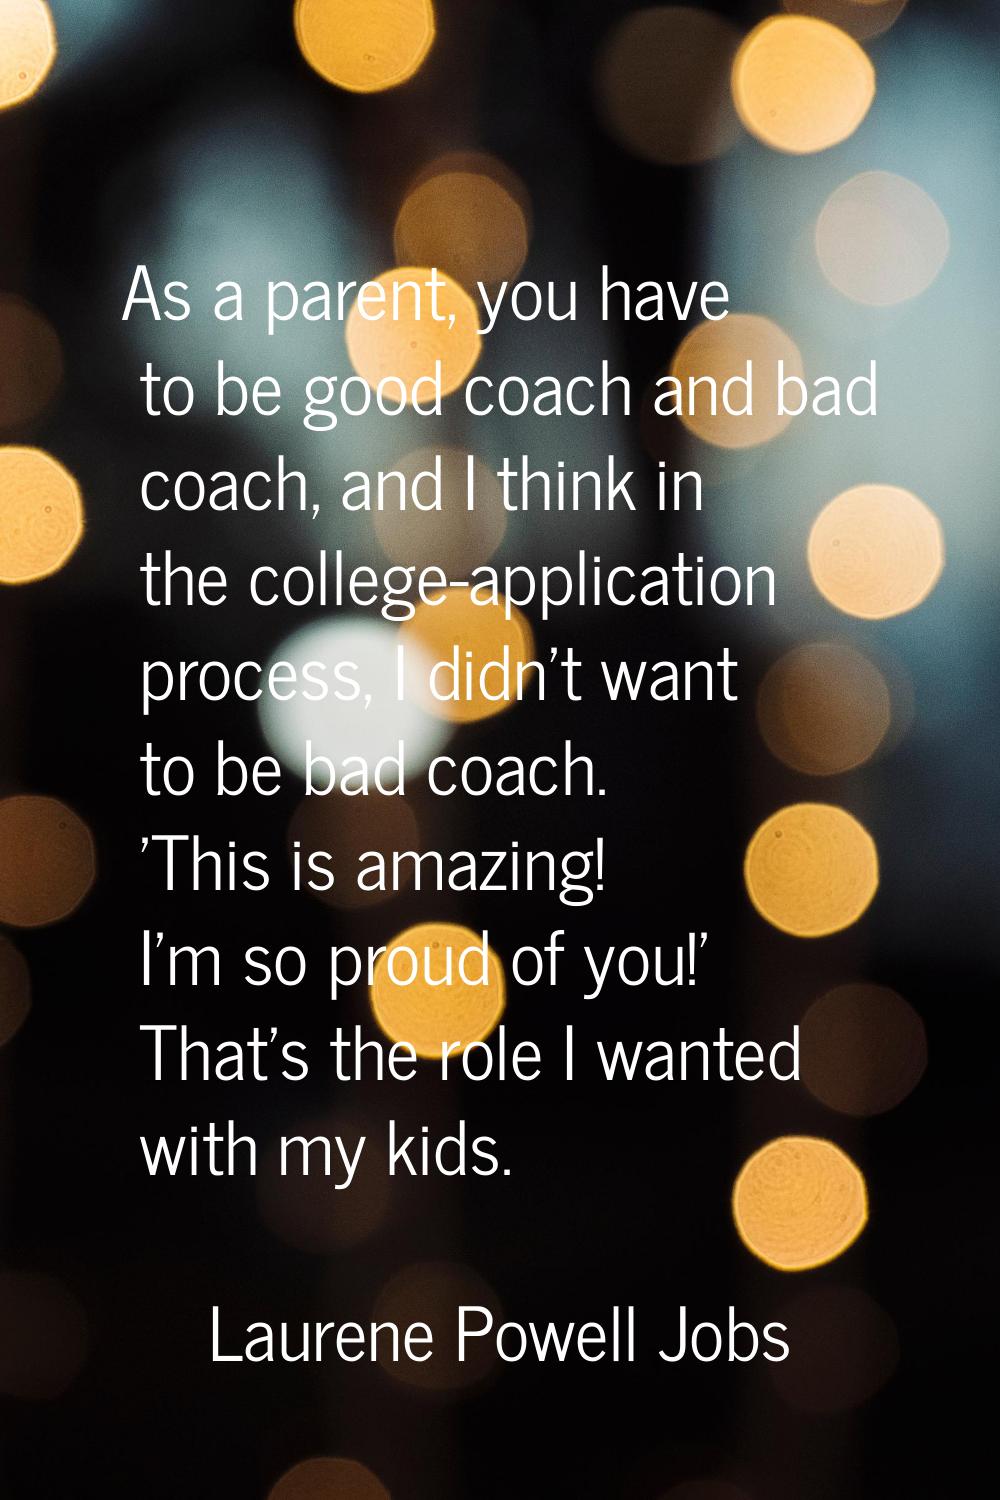 As a parent, you have to be good coach and bad coach, and I think in the college-application proces